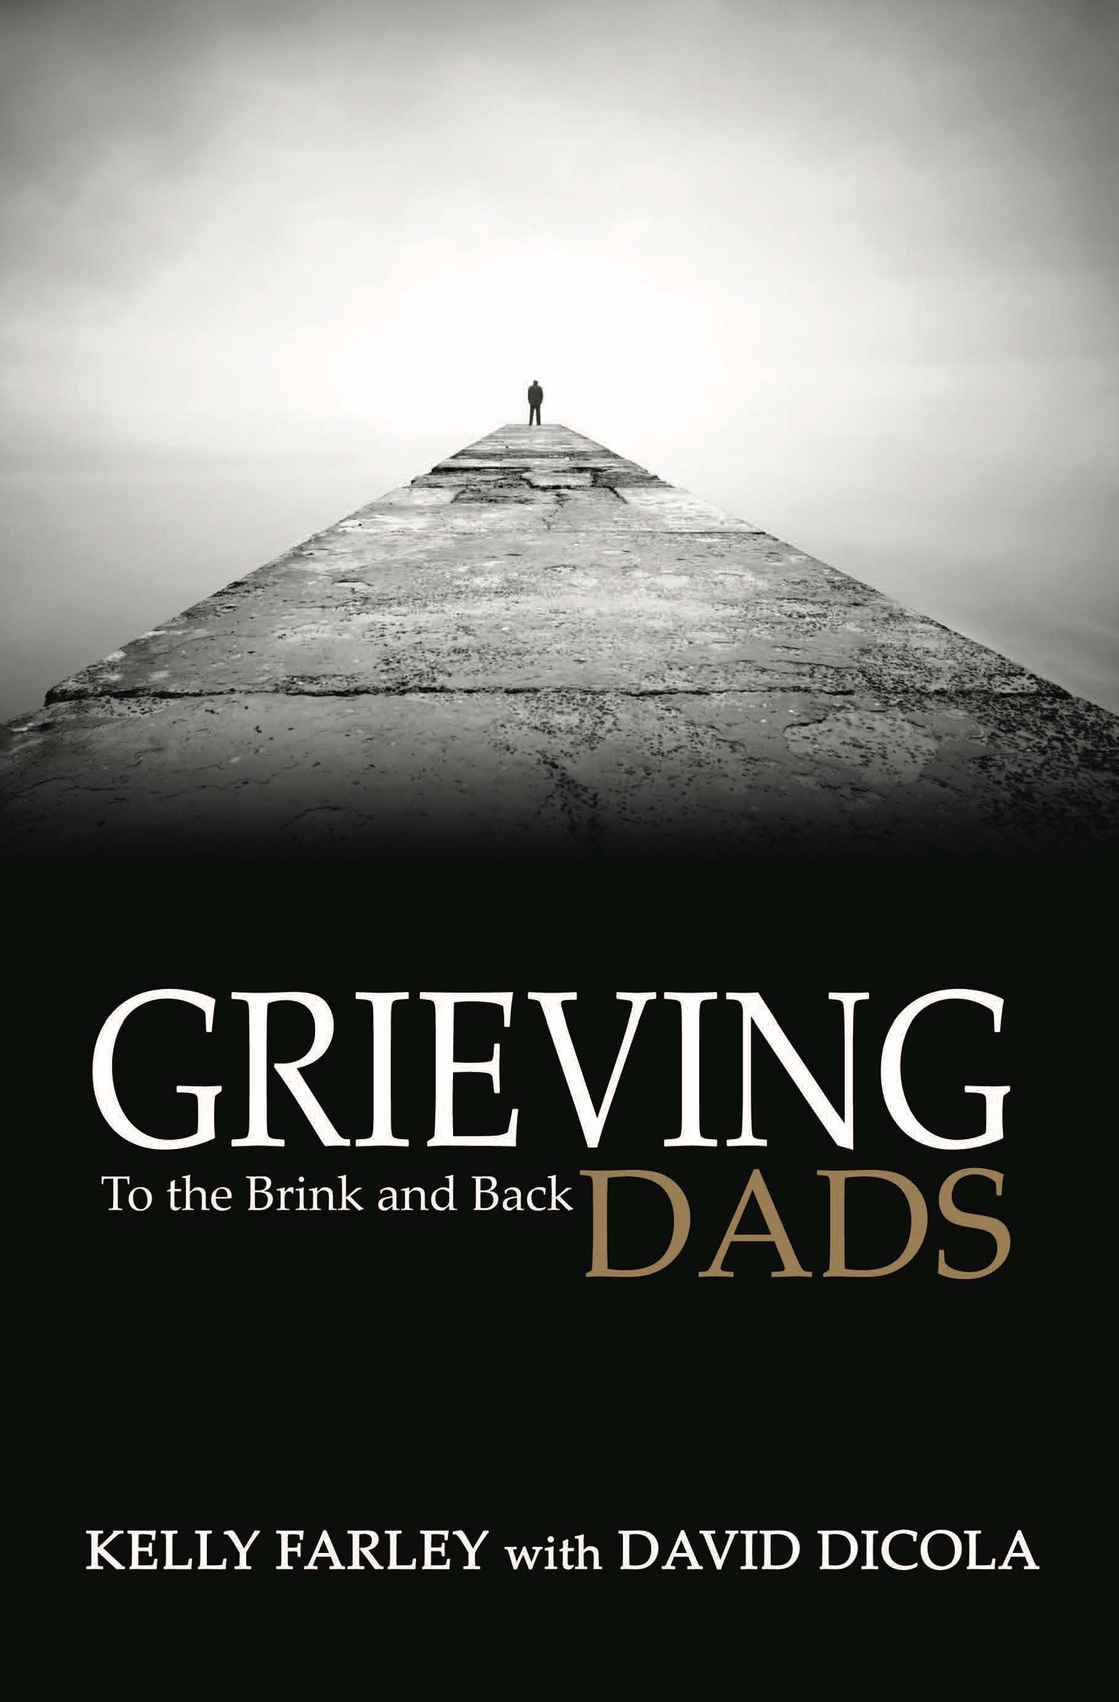 Grieving Dads - book cover - final files